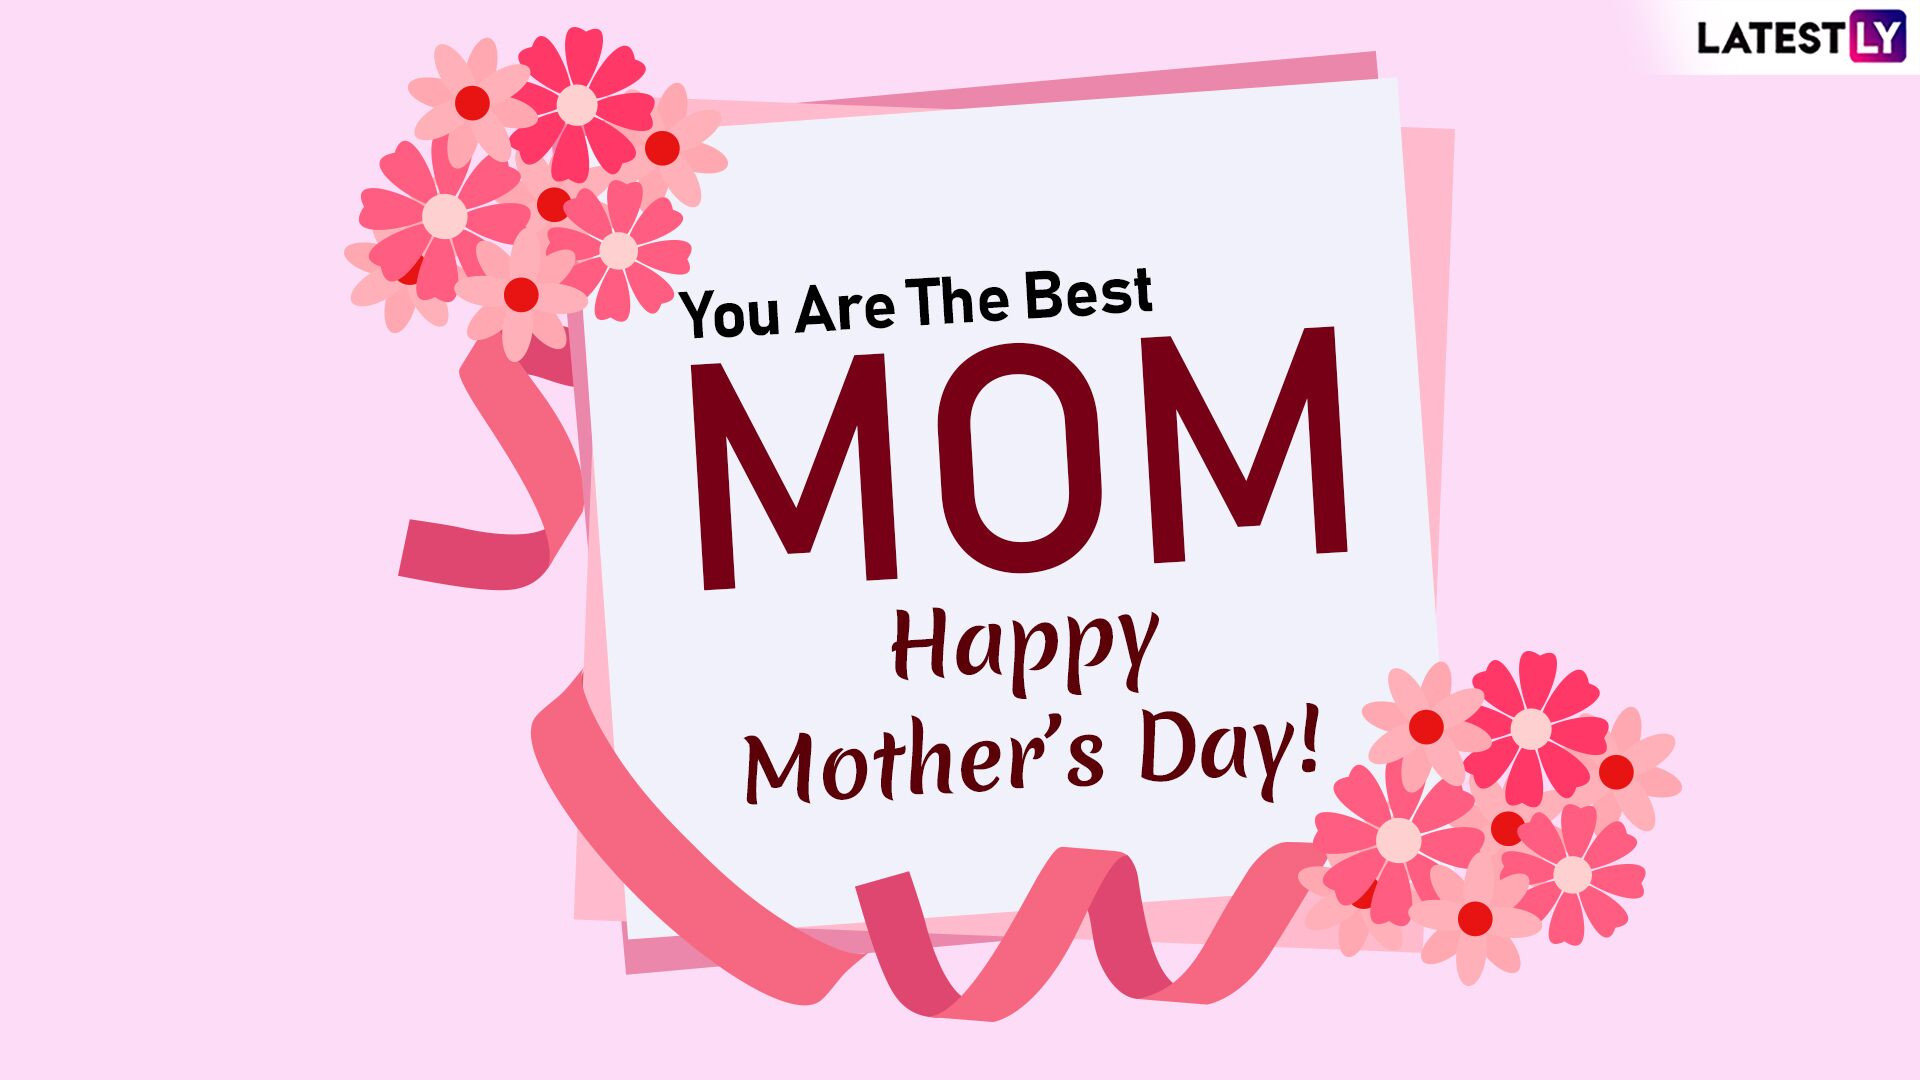 Happy Mothers Day Quotes And Images
 Happy Mother’s Day HD Quotes and Wallpapers for